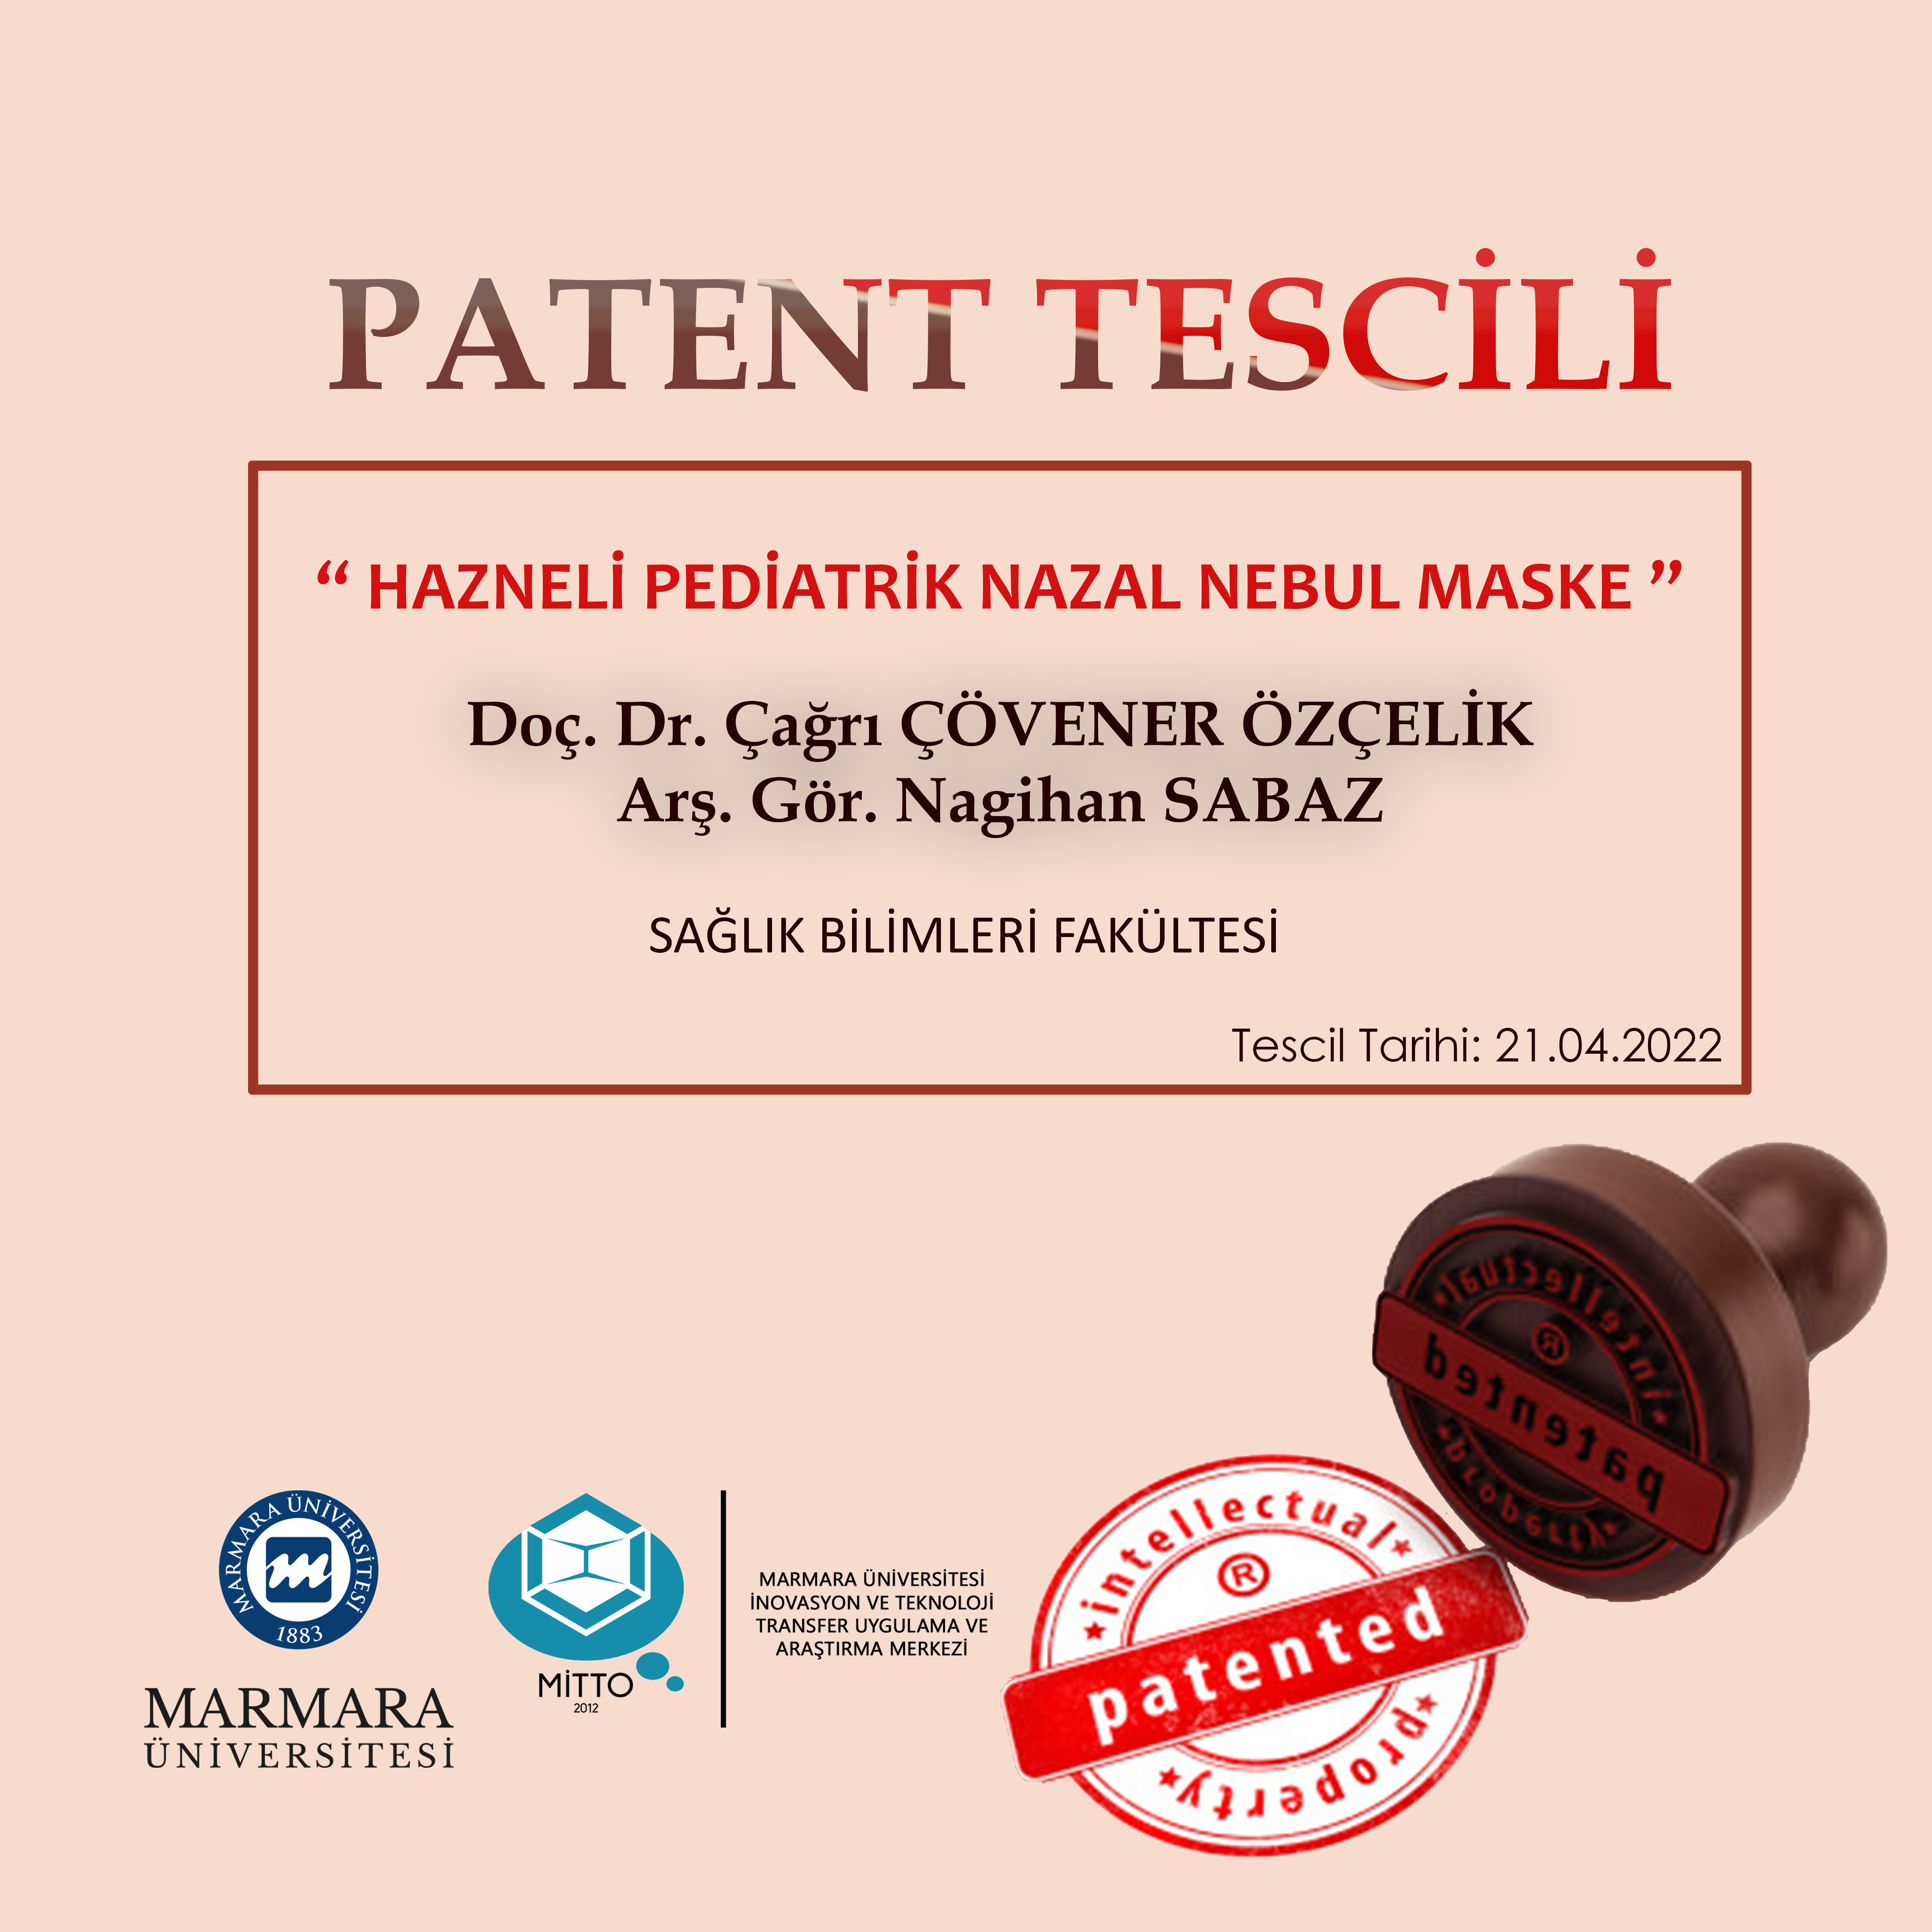 Patent4.png (2.69 MB)